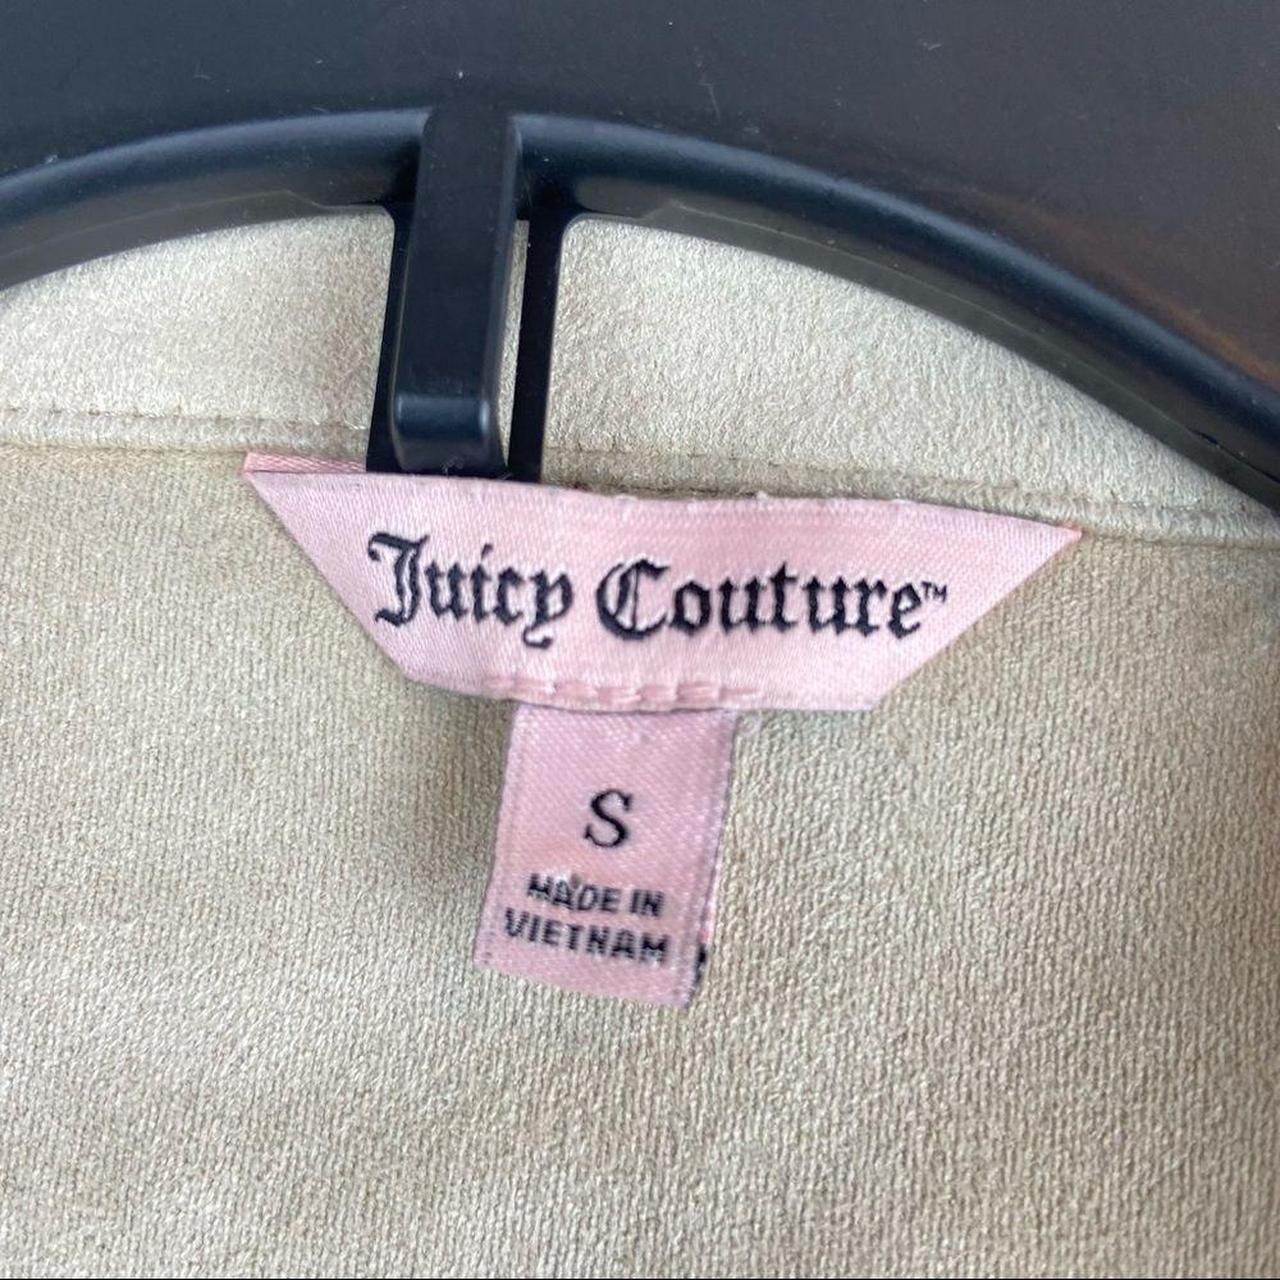 Juicy Couture Women's Tan and Grey Jacket (3)